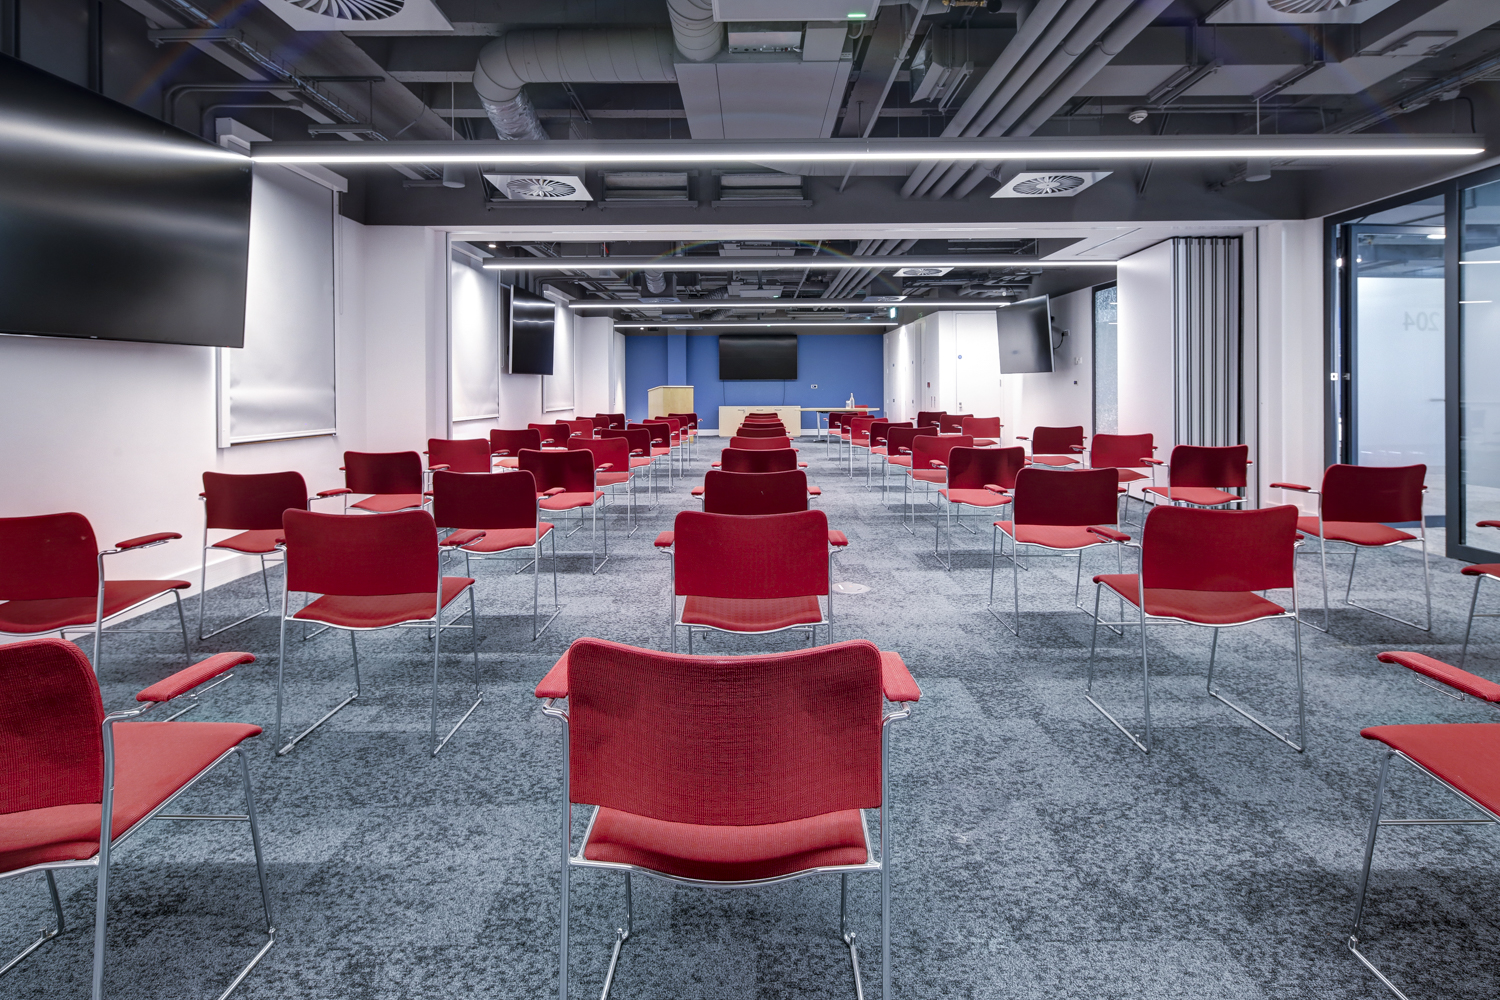 10 Union Street, Conference and Meetings Venue for Hire, London Bridge - Latest Blog Post Image